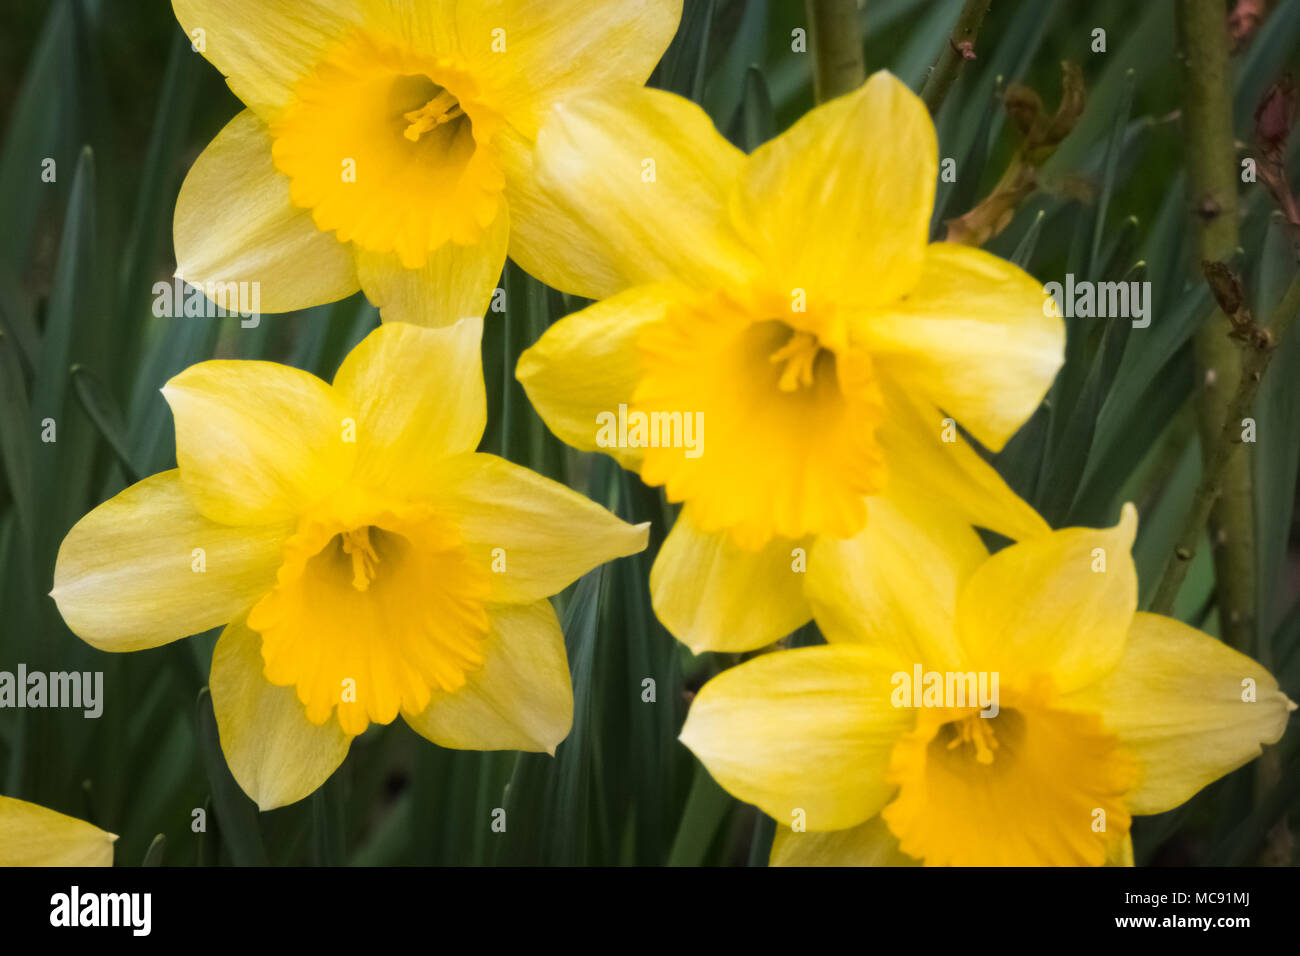 Springtime yellow Narcissus flowers blooming in the garden. Stock Photo